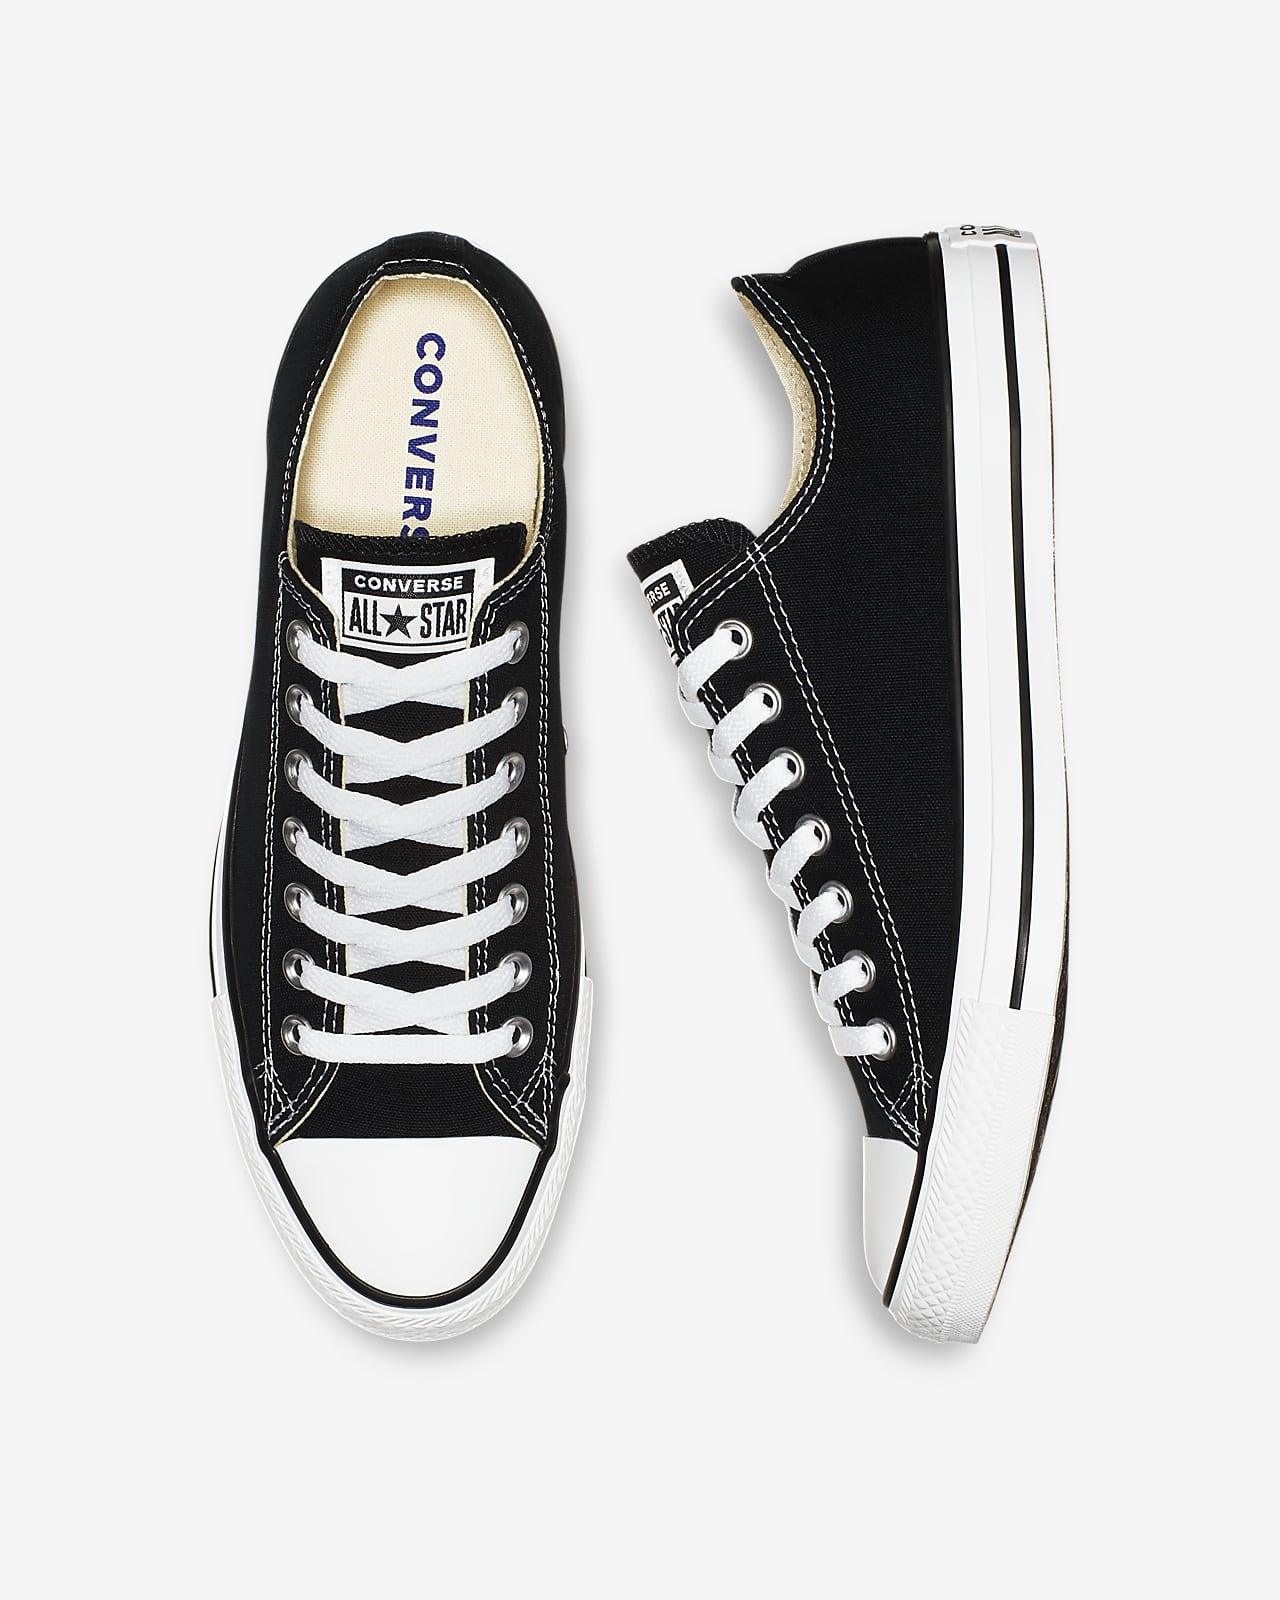 converse chuck taylor all star low top